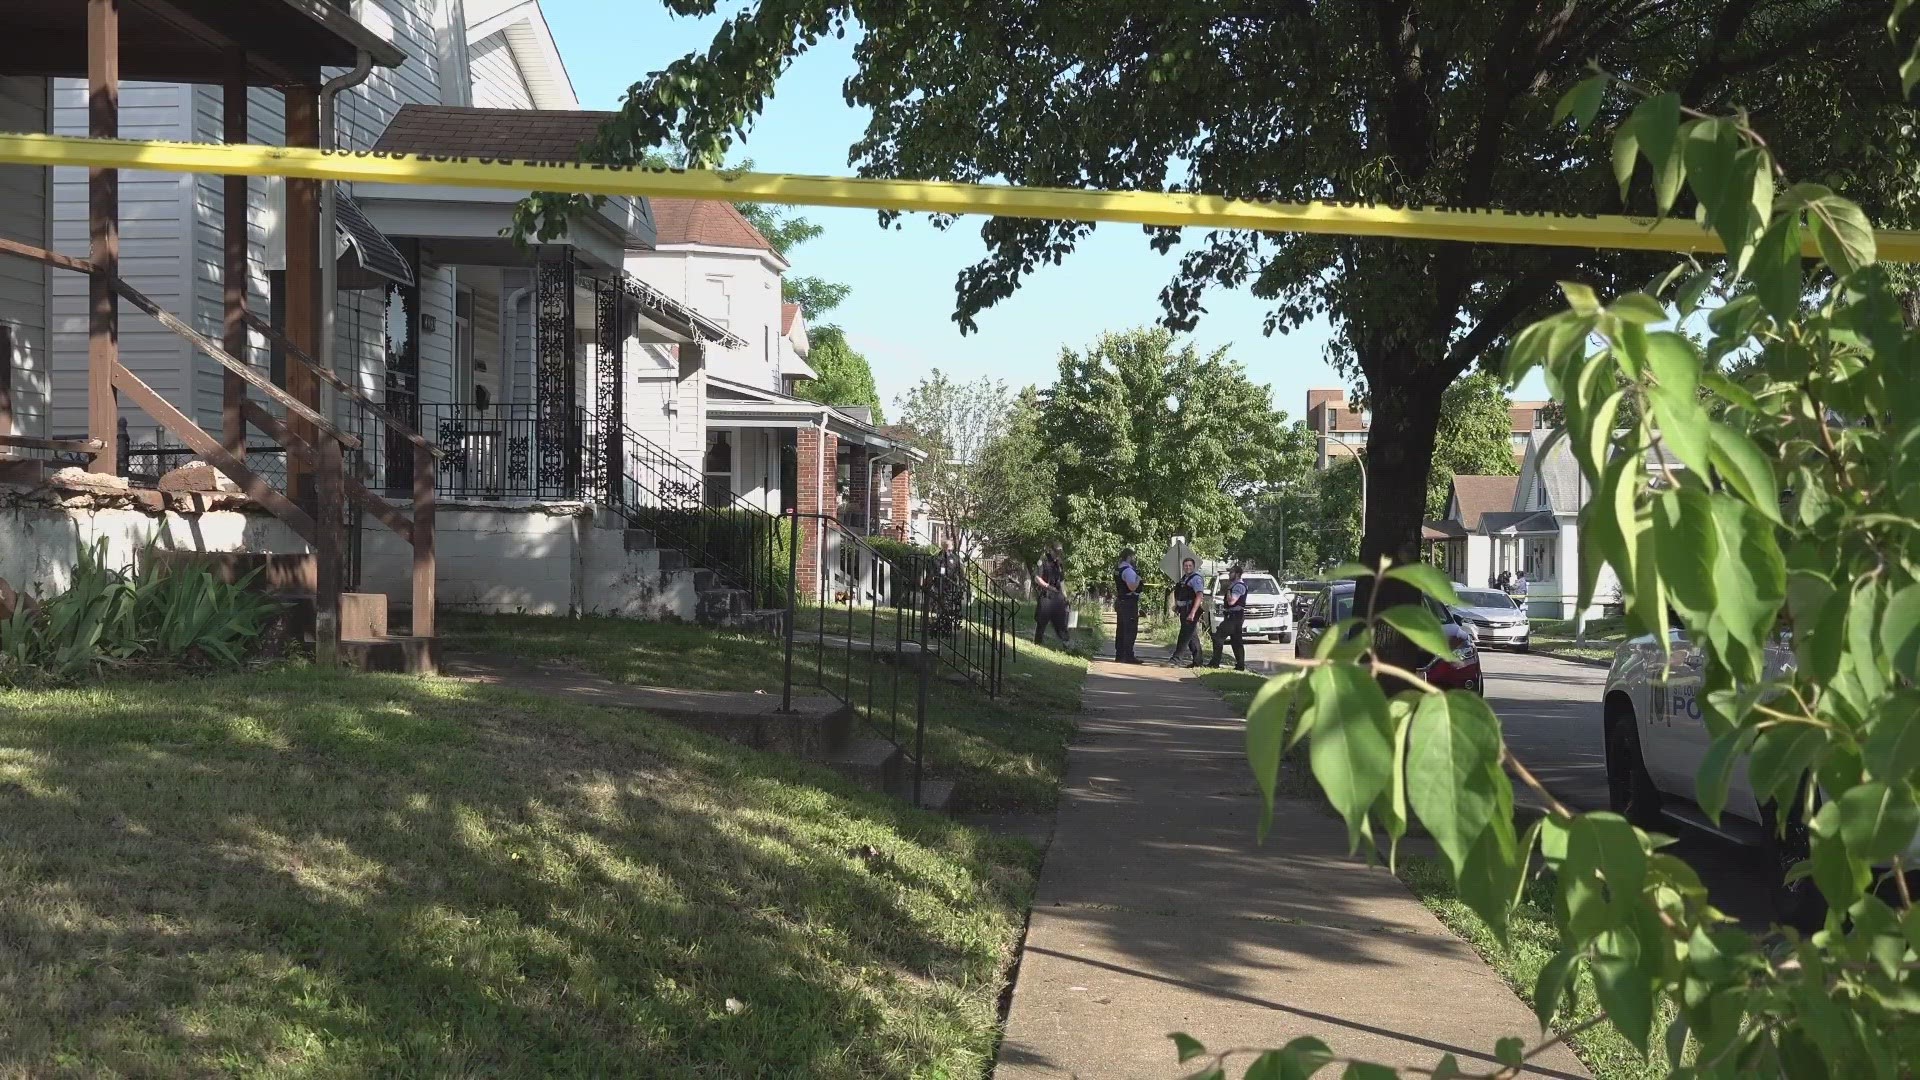 A man was shot and killed in St. Louis Monday. Police said they found the man suffering from gunshot wounds to the arm and ear.